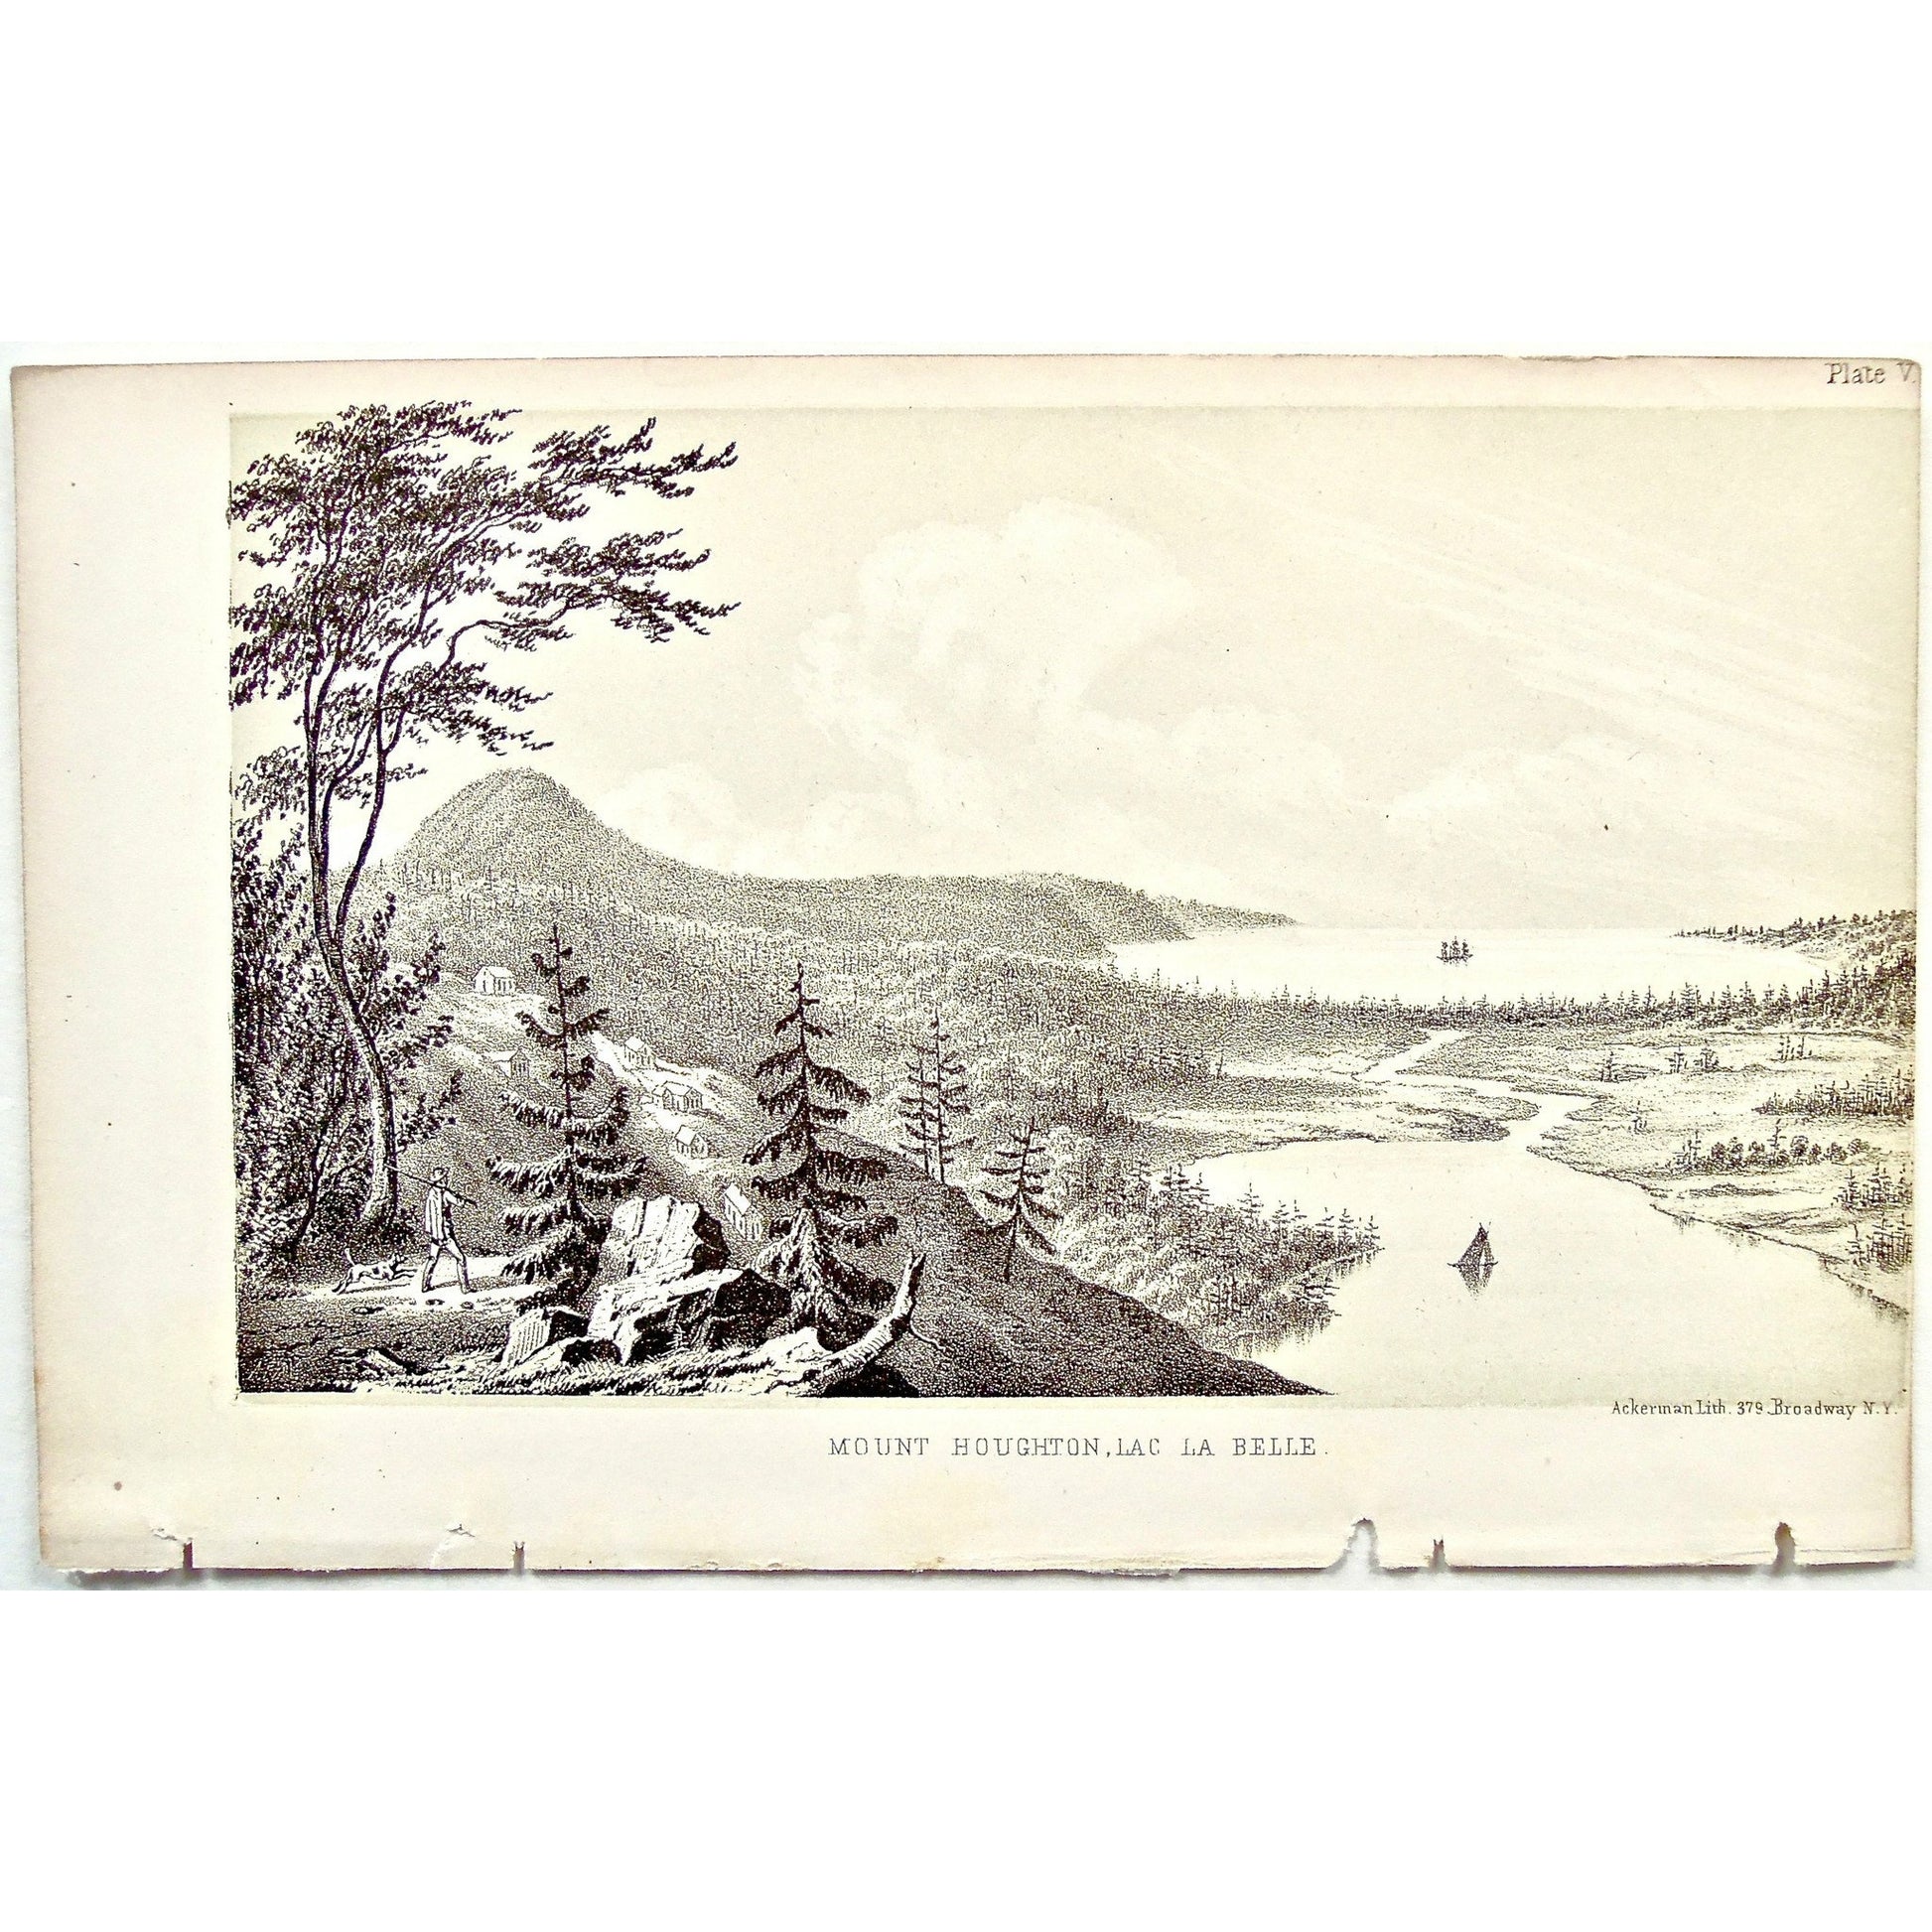 Mount Houghton, Lac La Belle, Mount, Houghton, Lac, La Belle, View, fishing, distant view, Landscape, Lake Superior, Lake, Superior, National Lakeshore, Lakeshore, Michigan, MI, Ackerman, 379 Broadway, Foster, Whitney, House of Representatives, House of Reps., Report, Geology, Topography, Land District, State of Michigan, Part II, The Iron Region, General Geology, Washington D.C., Washington, DC, D.C., 1851, lithograph, two-toned, Antique Print, Antique, Prints, Vintage, Art, Wall art, Decor, wall decor, de